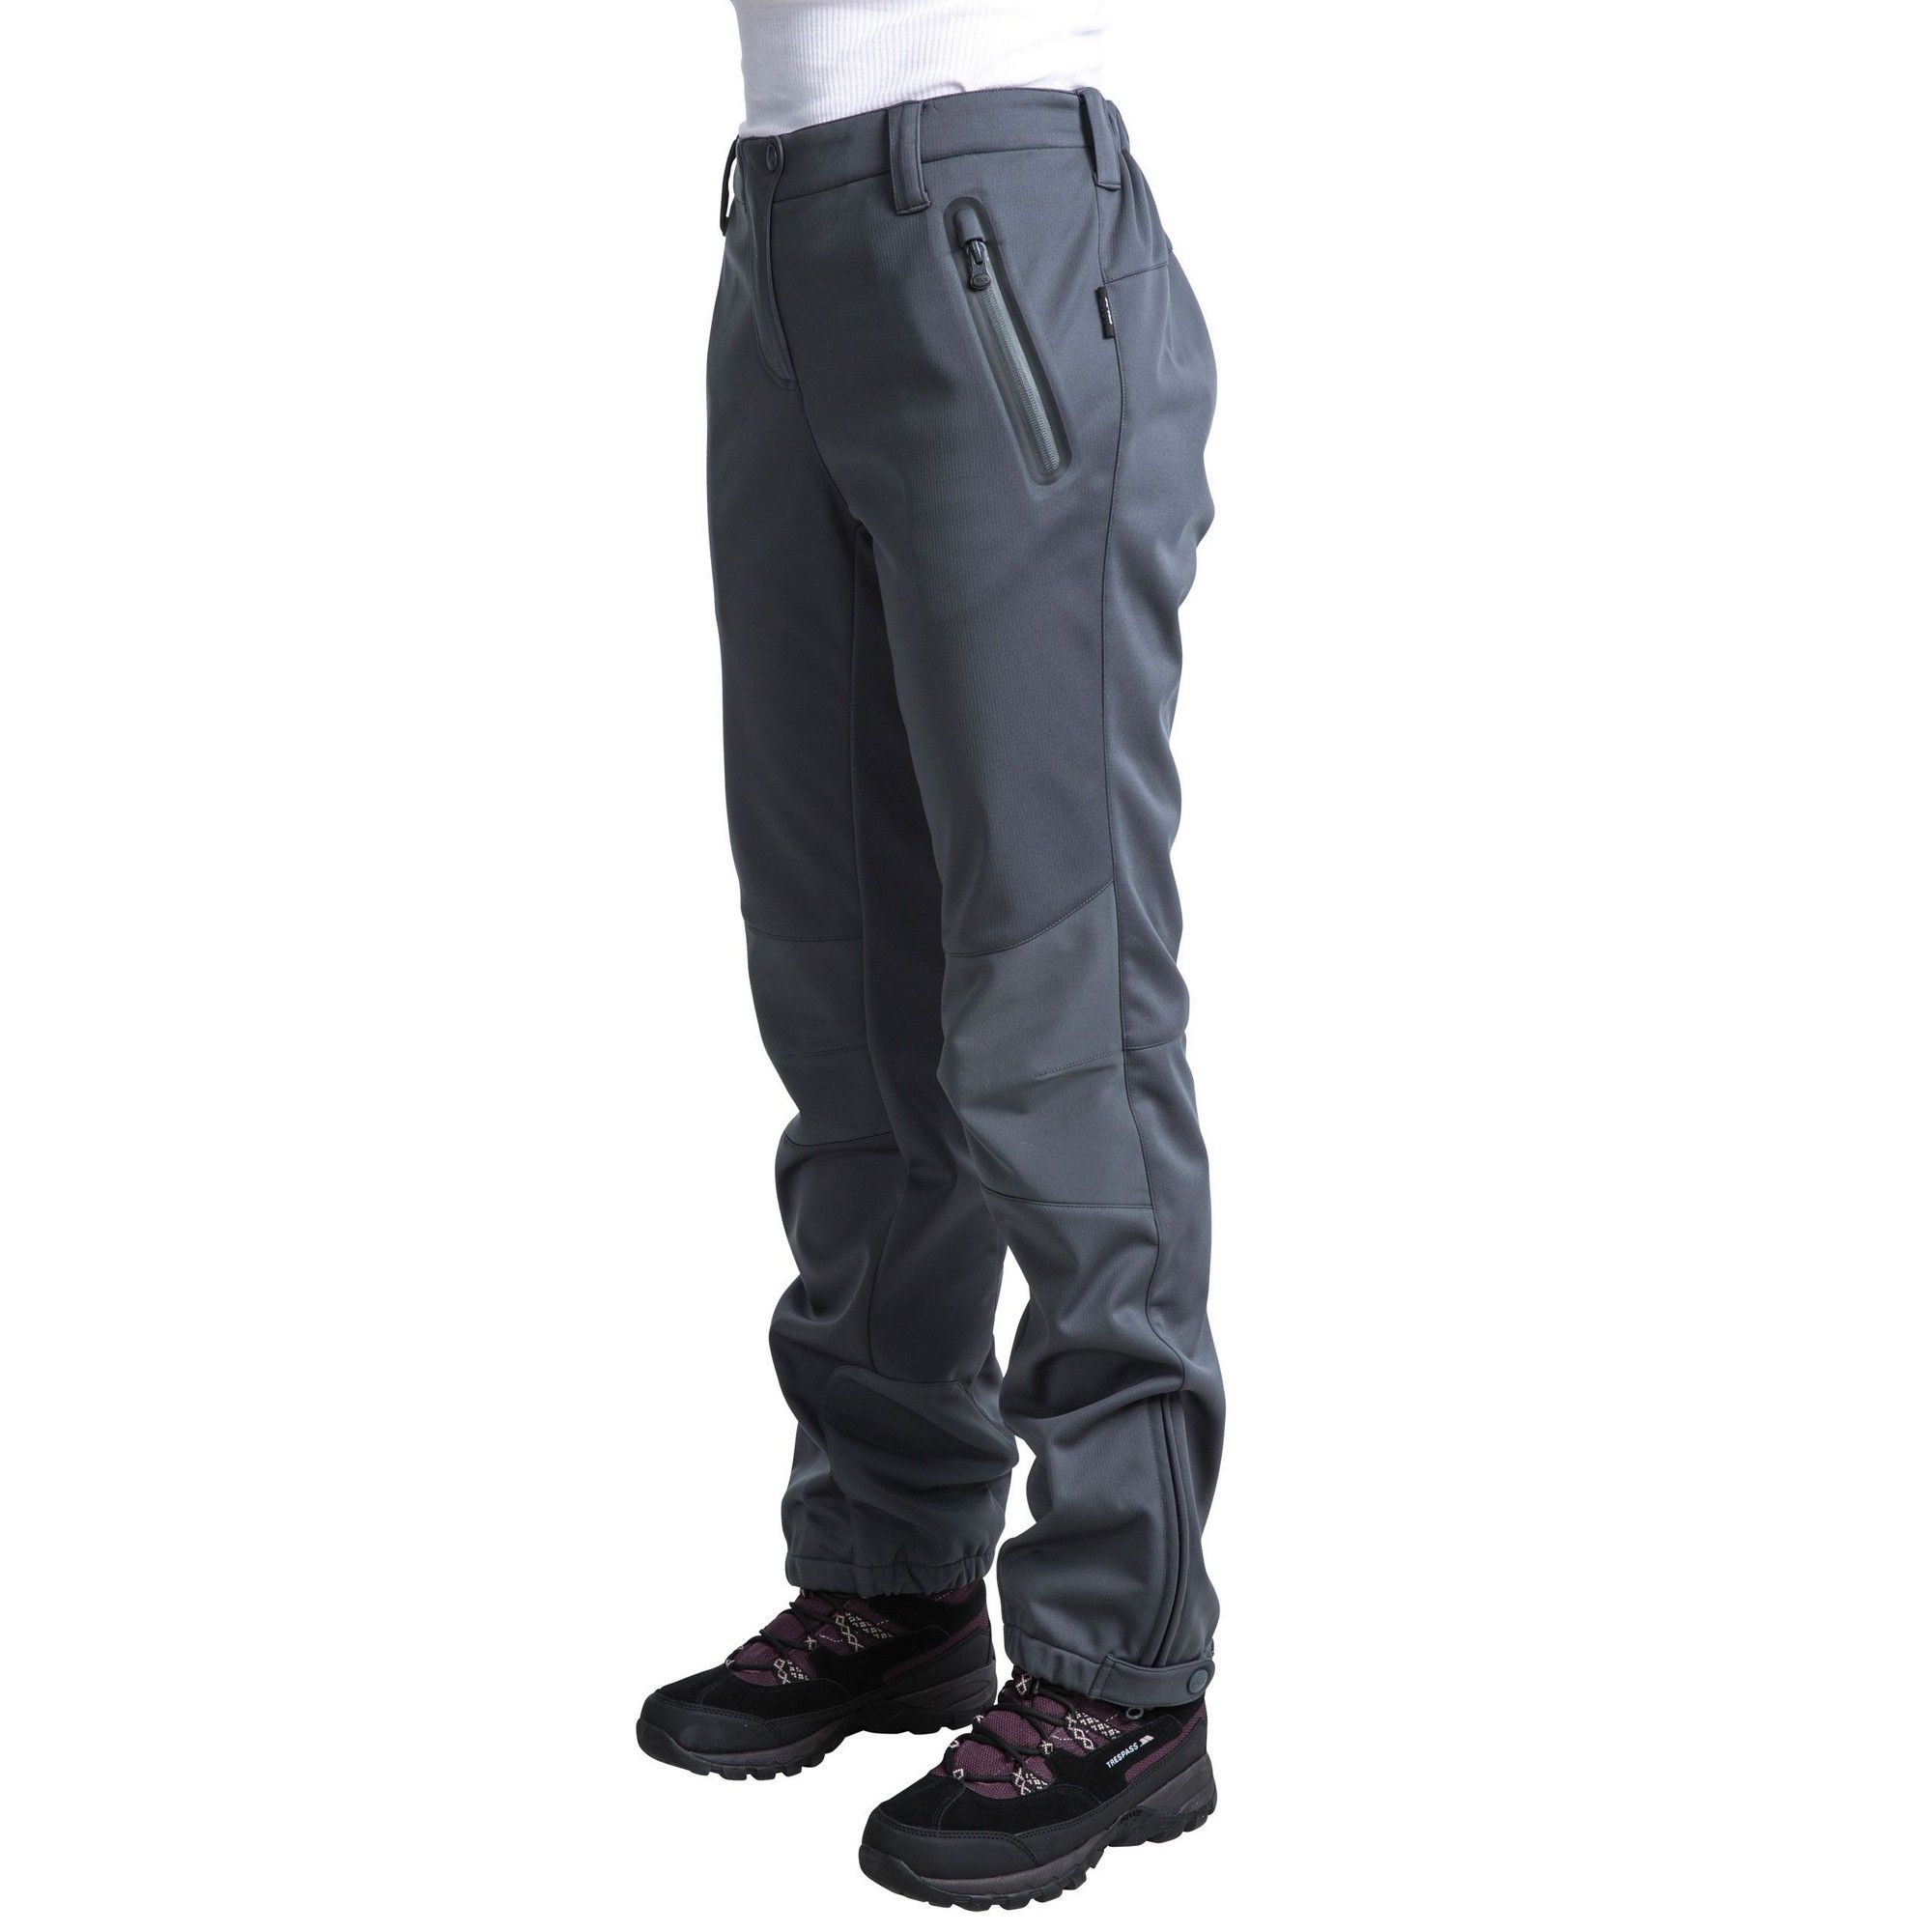 Flat waisted outdoor trousers with elastication at back. Front fly opening. 3 welded waterproof zip pockets. Articulated knee darts. Reinforced ankle patches. Elasticated ankles with zipped side vent. Waterproof 10000mm, breathable 5000mvp, windproof. 100% polyester TPU membrane. Trespass Womens Waist Sizing (approx): XS/8 - 25in/66cm, S/10 - 28in/71cm, M/12 - 30in/76cm, L/14 - 32in/81cm, XL/16 - 34in/86cm, XXL/18 - 36in/91.5cm.